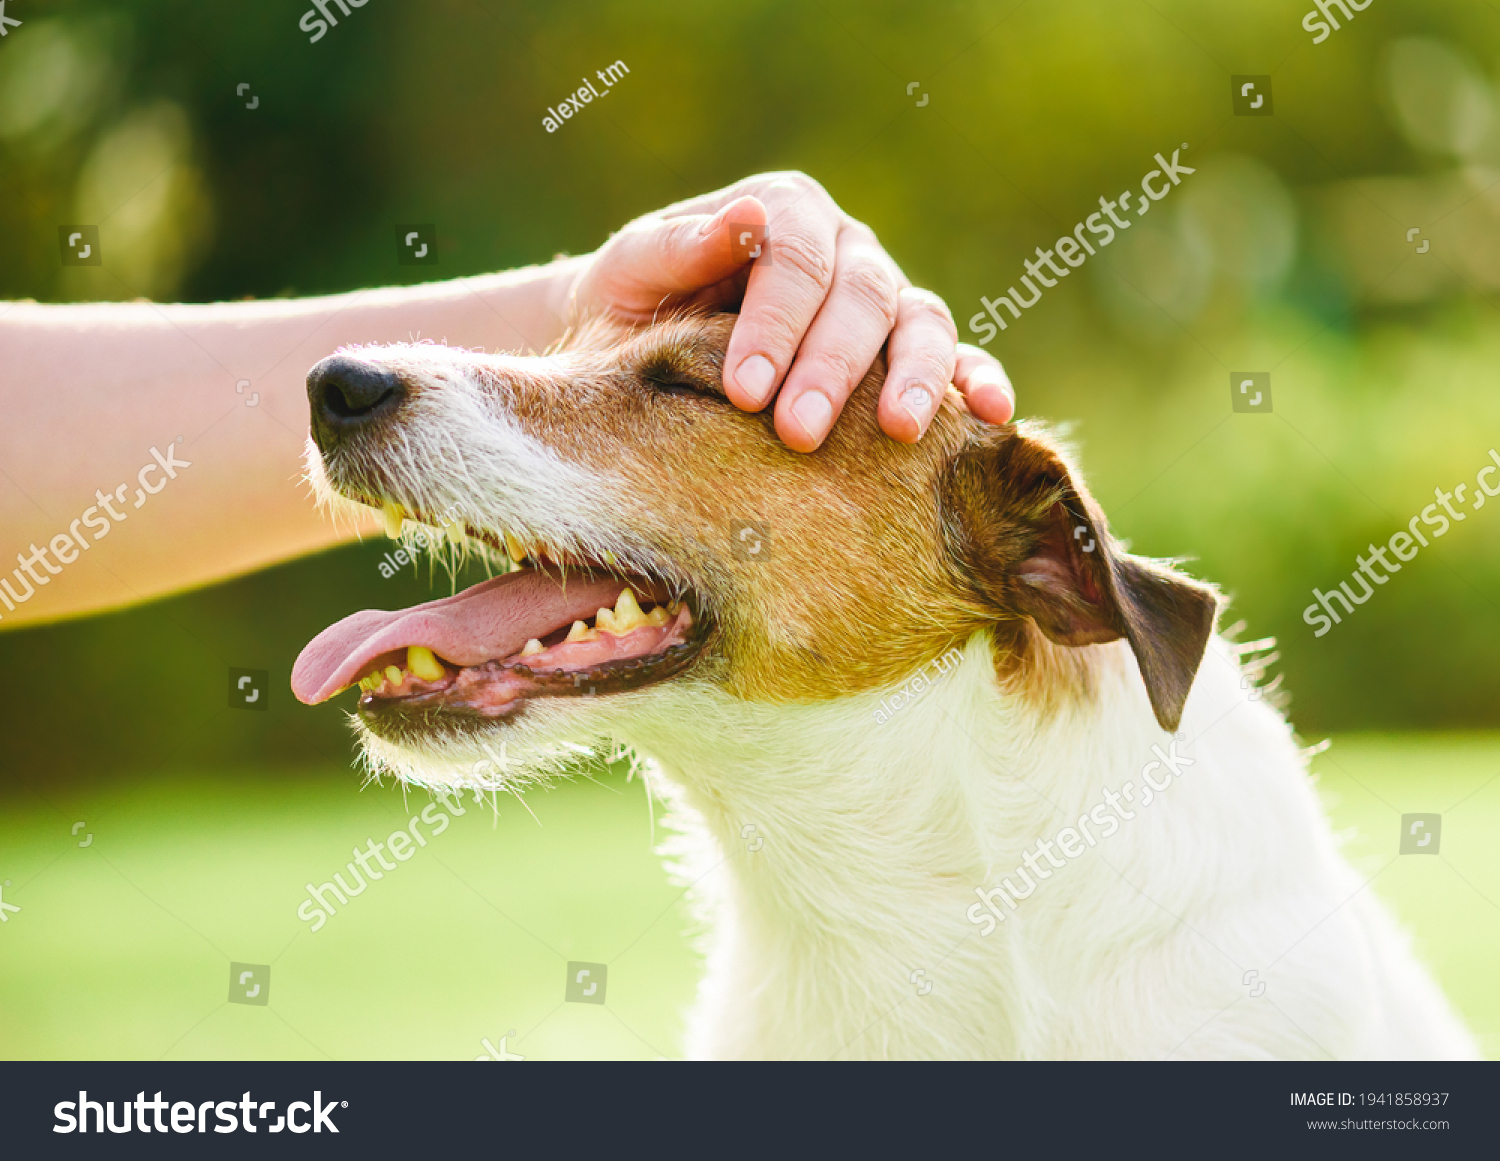 Pet owner uses physical contact to calm down her dog and stop anxiety #1941858937